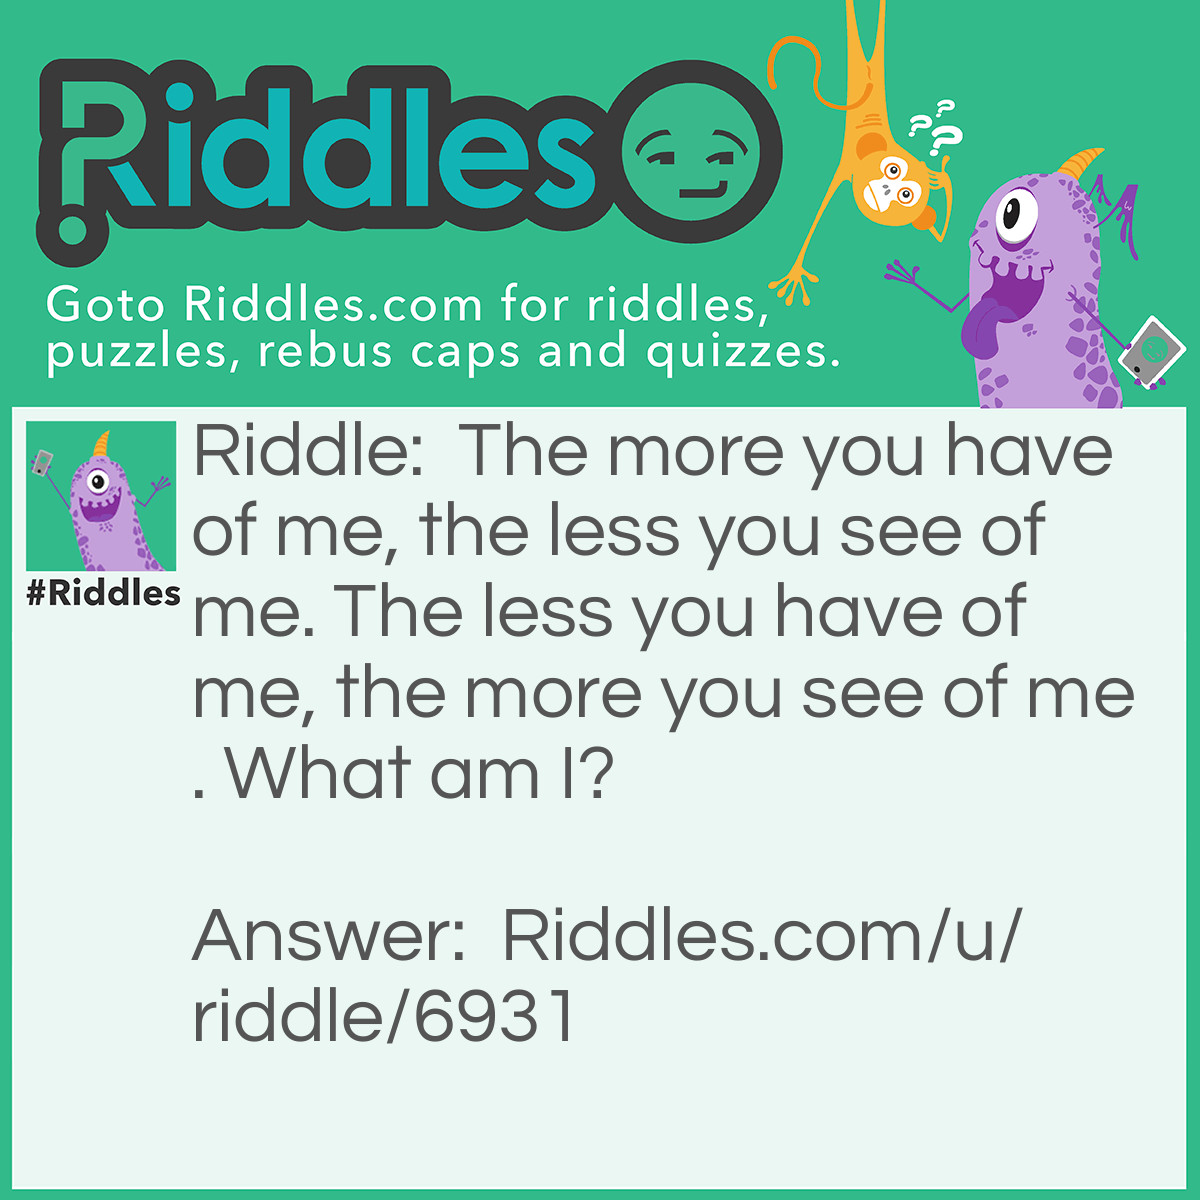 Riddle: The more you have of me, the less you see of me. The less you have of me, the more you see of me. What am I? Answer: The last of something.